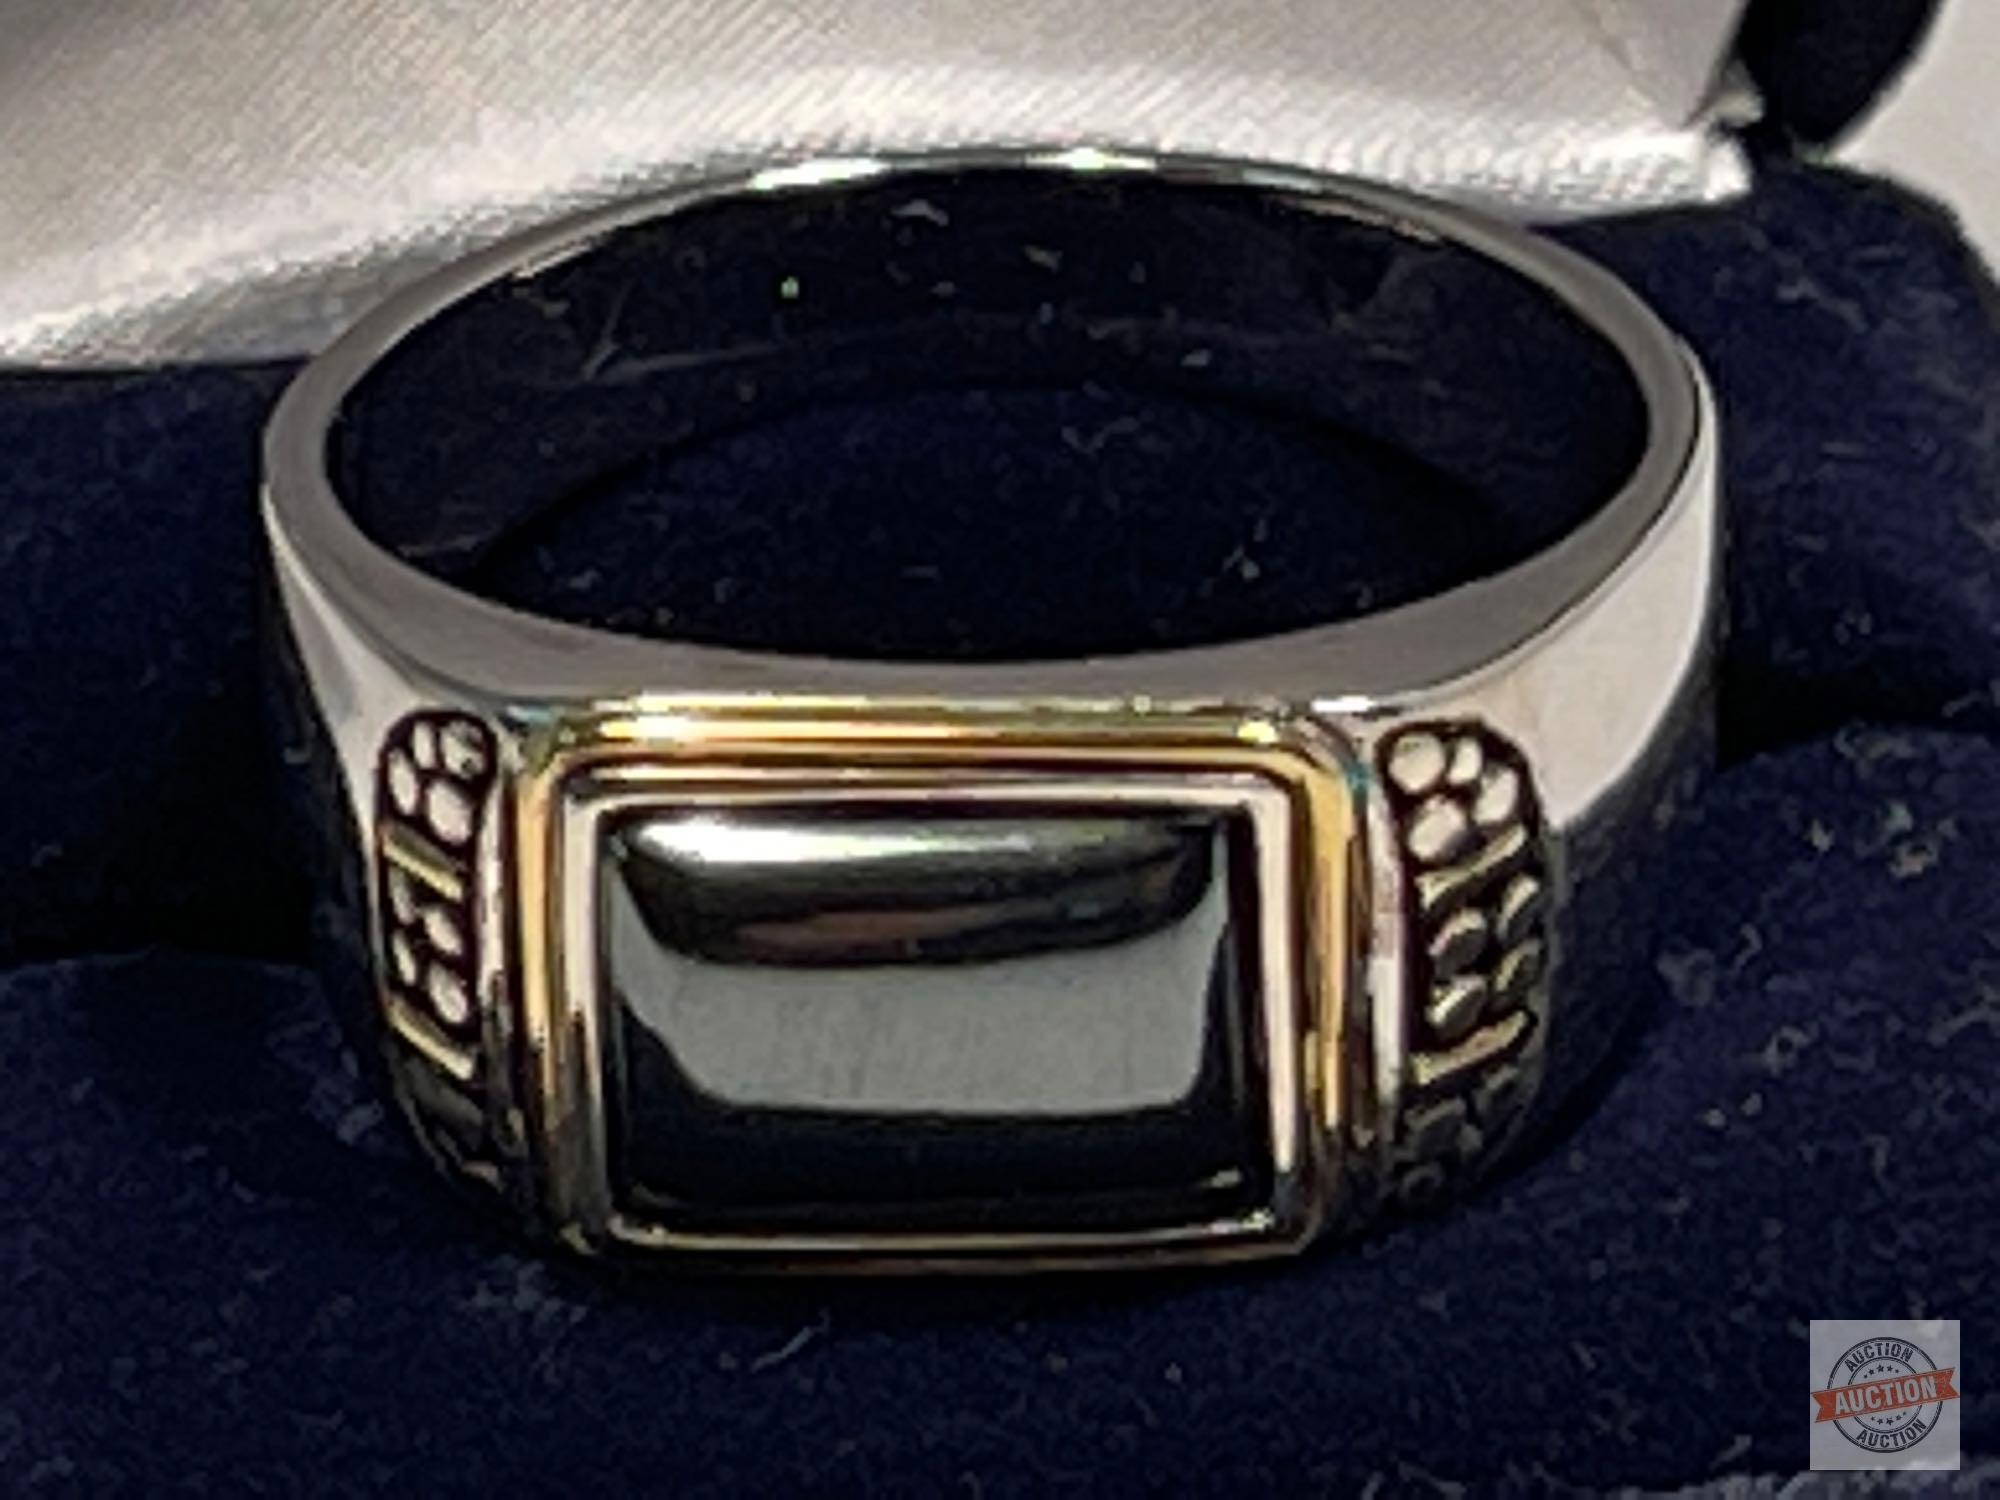 Jewelry - Ring, Danbury Mint, 14k gold/ sterling two-tone men's ring